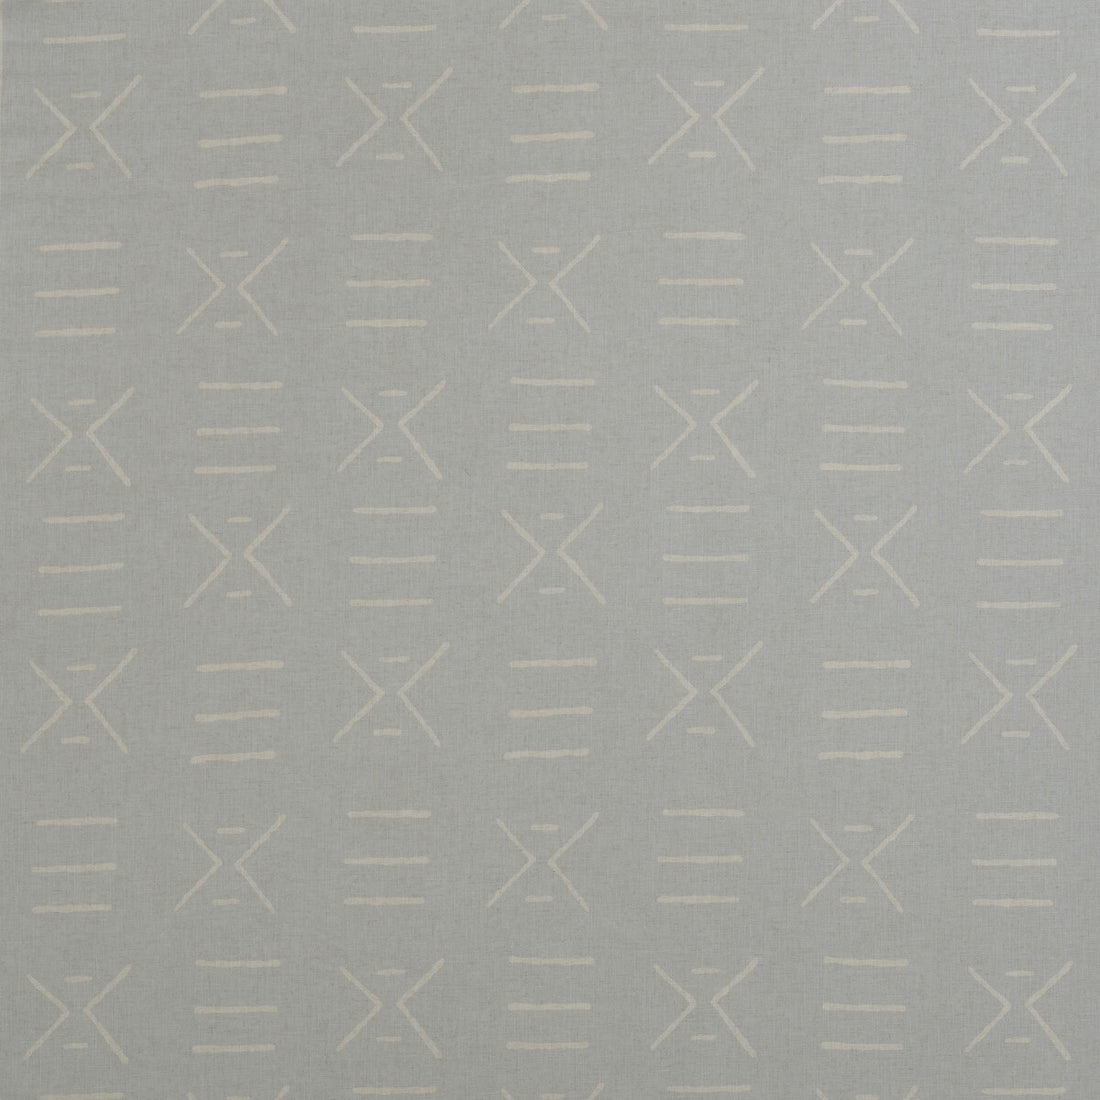 Kongo fabric in powder color - pattern AM100314.15.0 - by Kravet Couture in the Andrew Martin Gobi collection